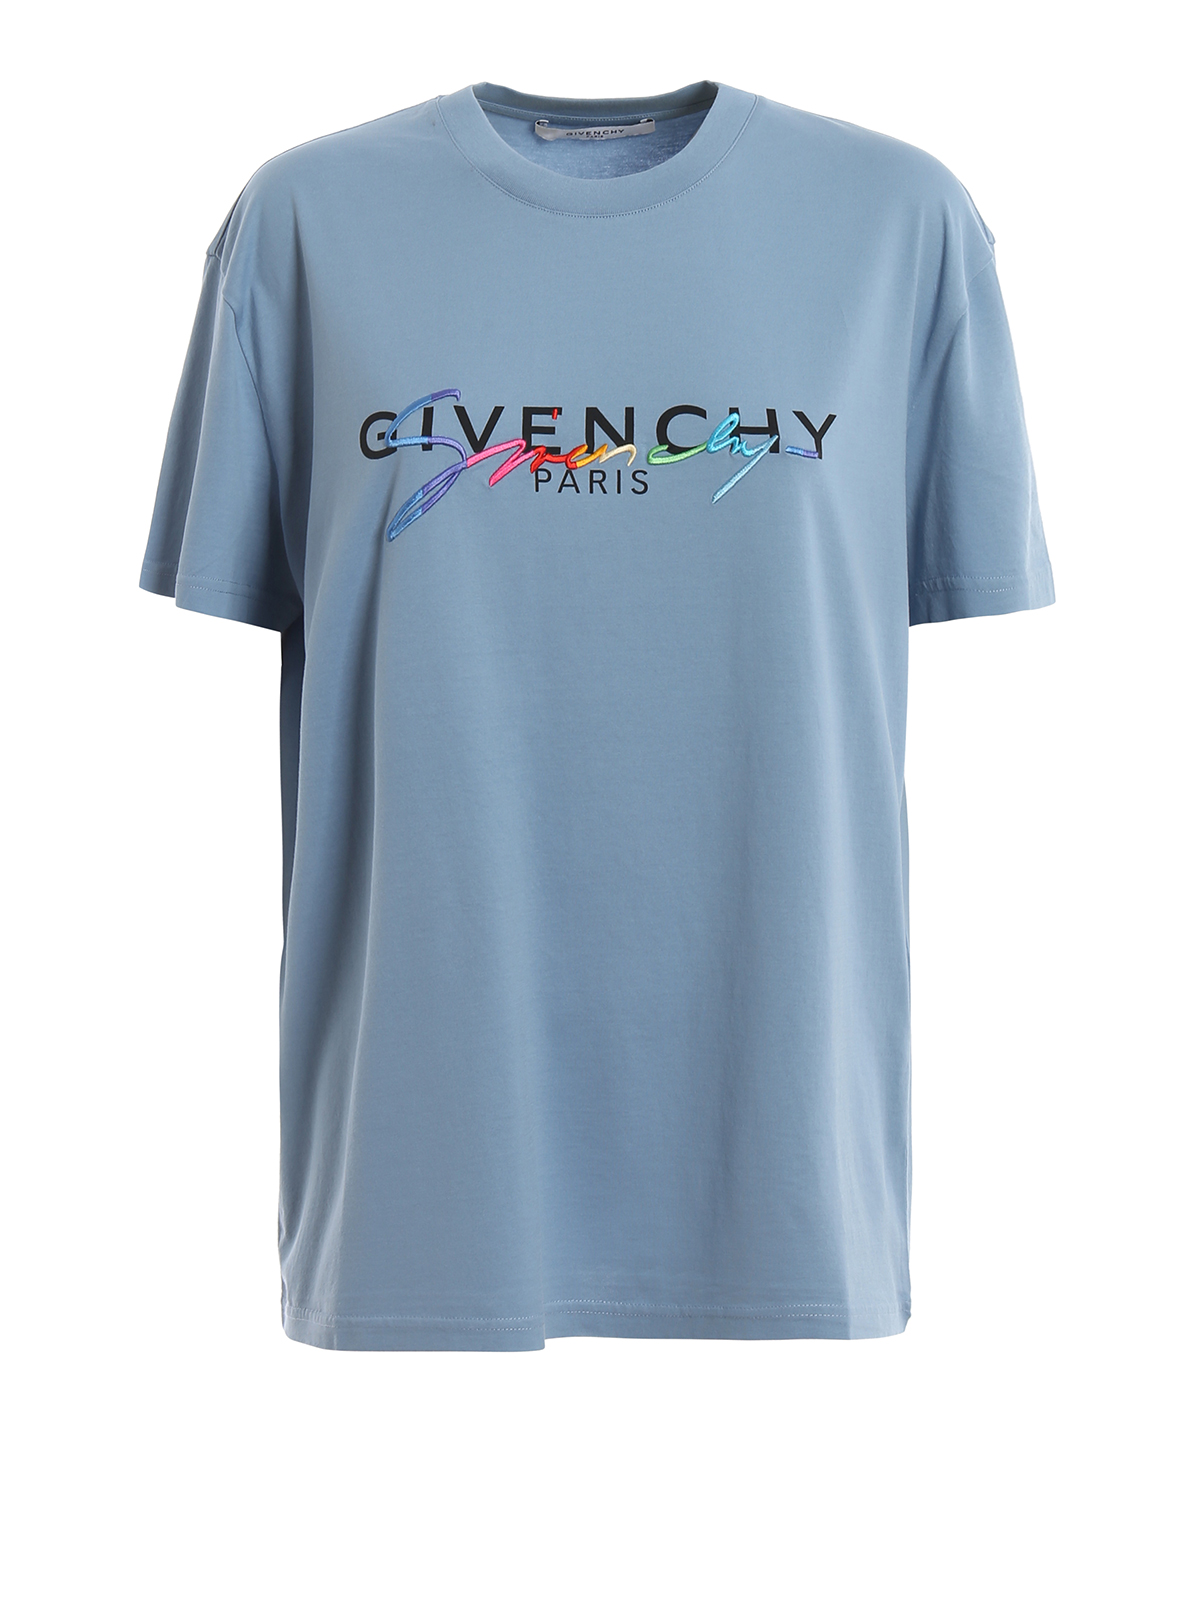 Zuidwest Klooster Tenslotte T-shirts Givenchy - Logo embroidery over T-shirt - BW70603Z2C450